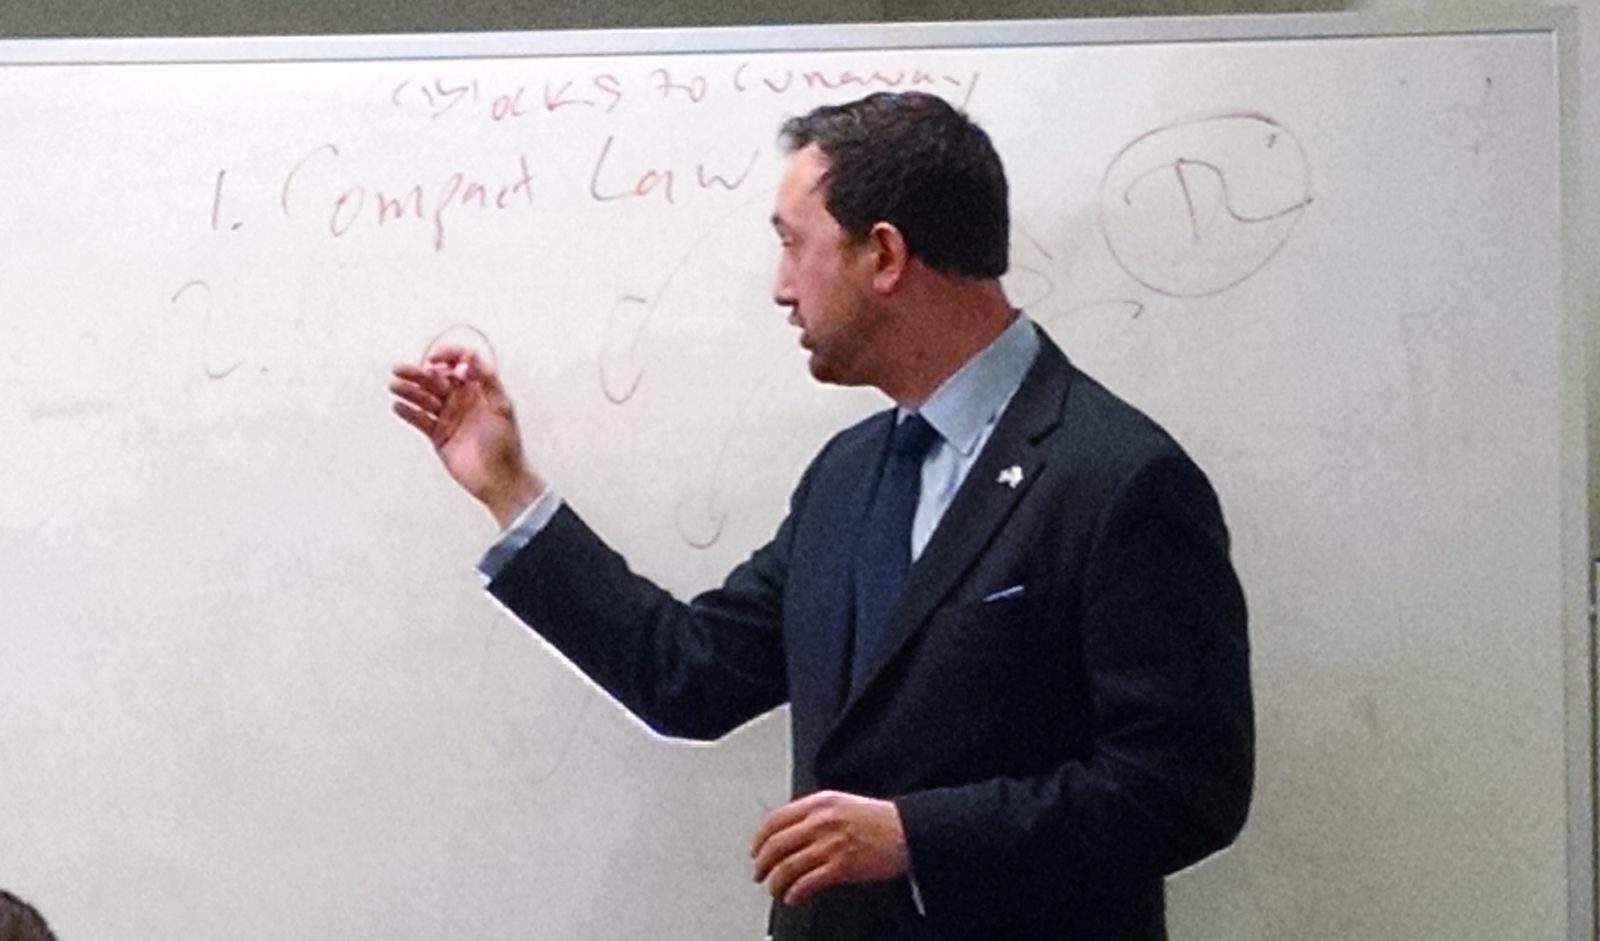 TFAS alumnus Adam Kwasman (CSF 04) speaks to Capital Semester students about the importance of state government. Kwasman was a member of the Arizona House of Representatives.